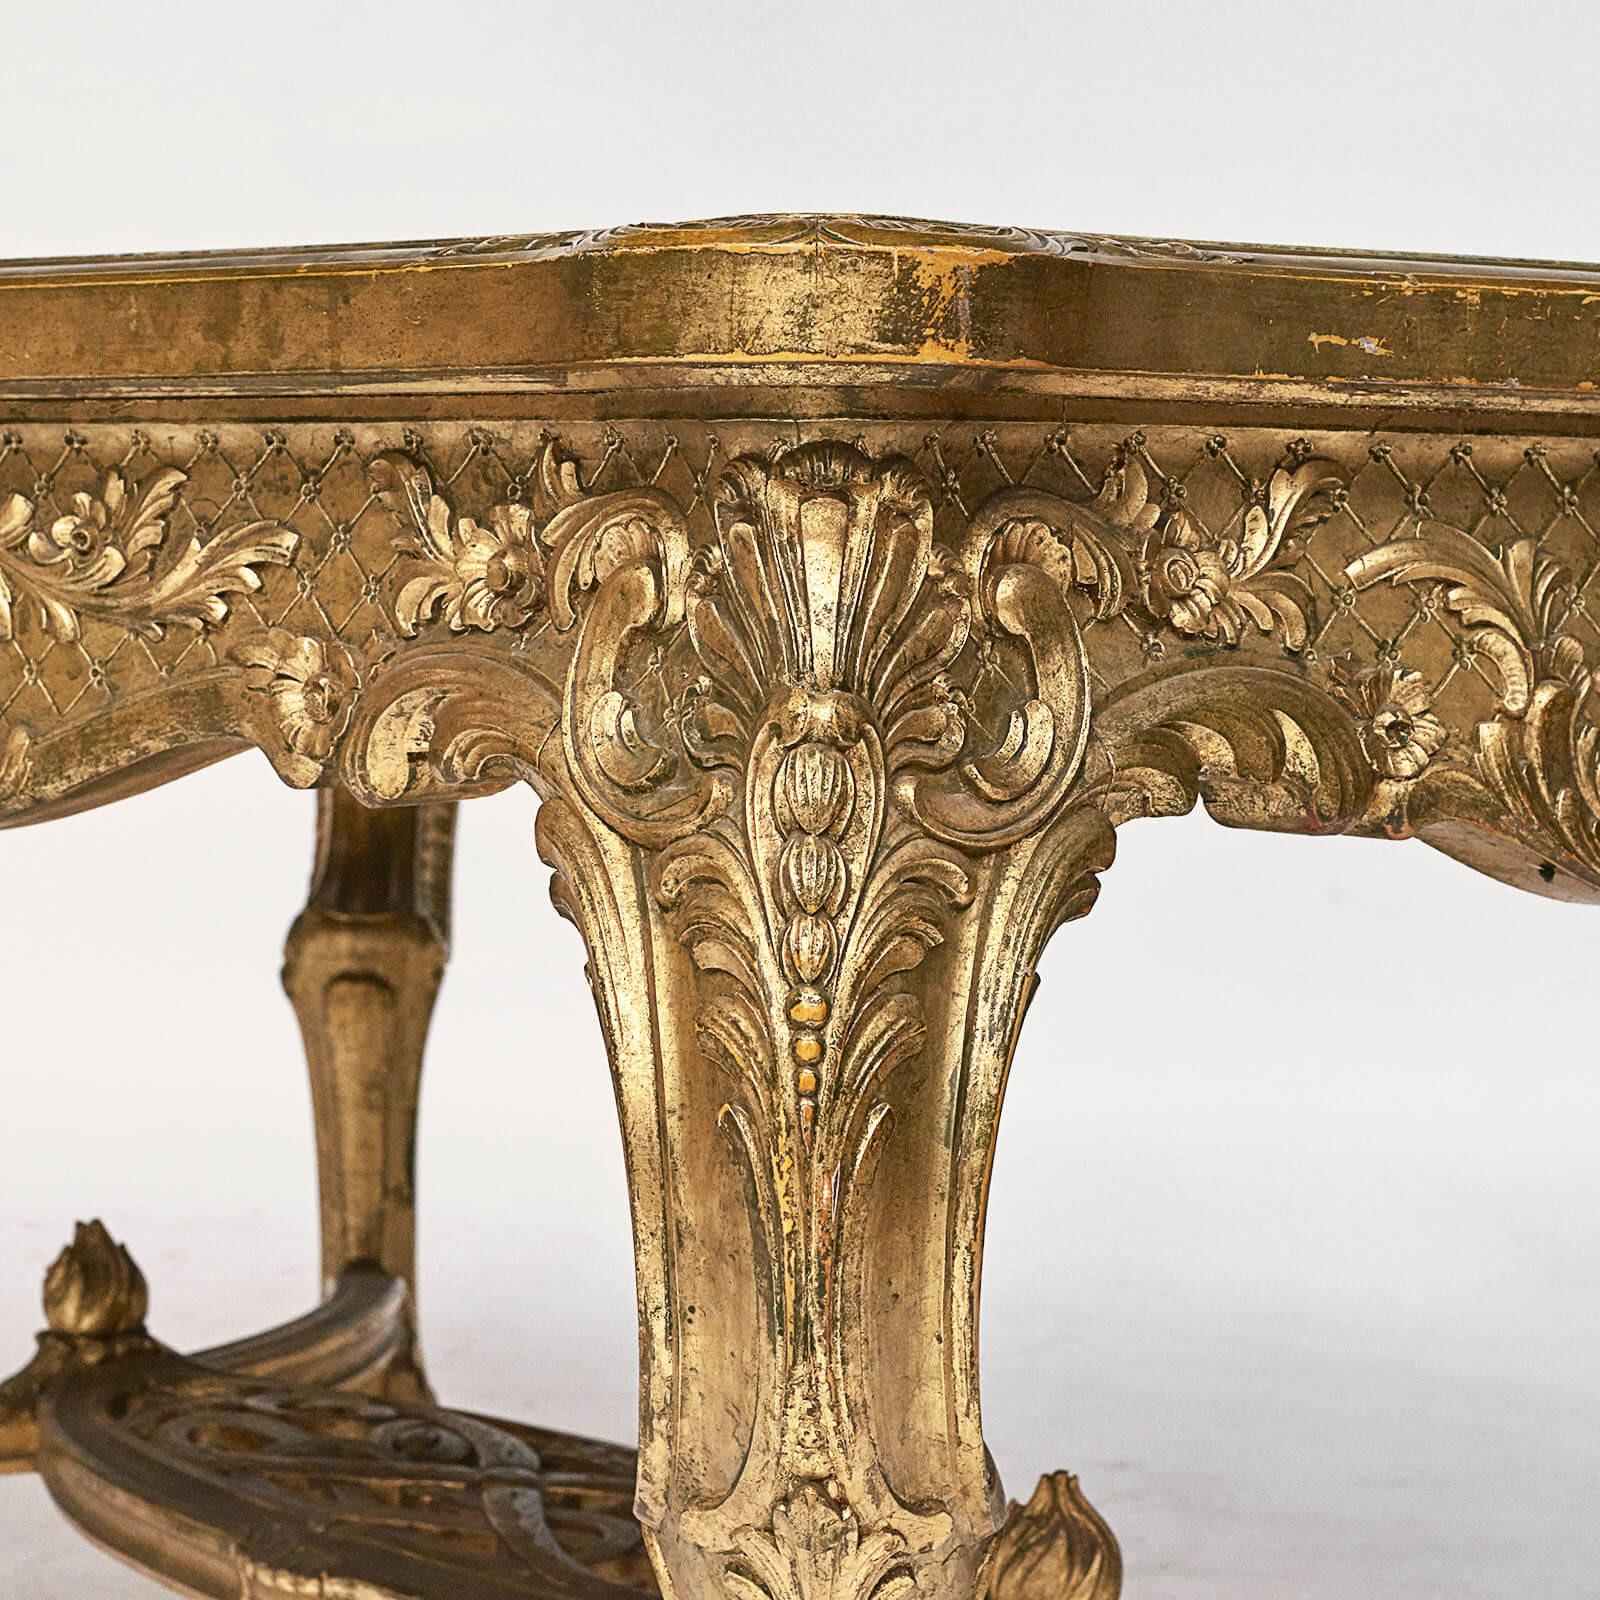 Royal lounge table from Fredensborg Palace. (Summer residence for the Danish royal family). Wood cut and gilded. Rare Swedish marble top (color: greenish) Made by Danish Royal Court Supplier 